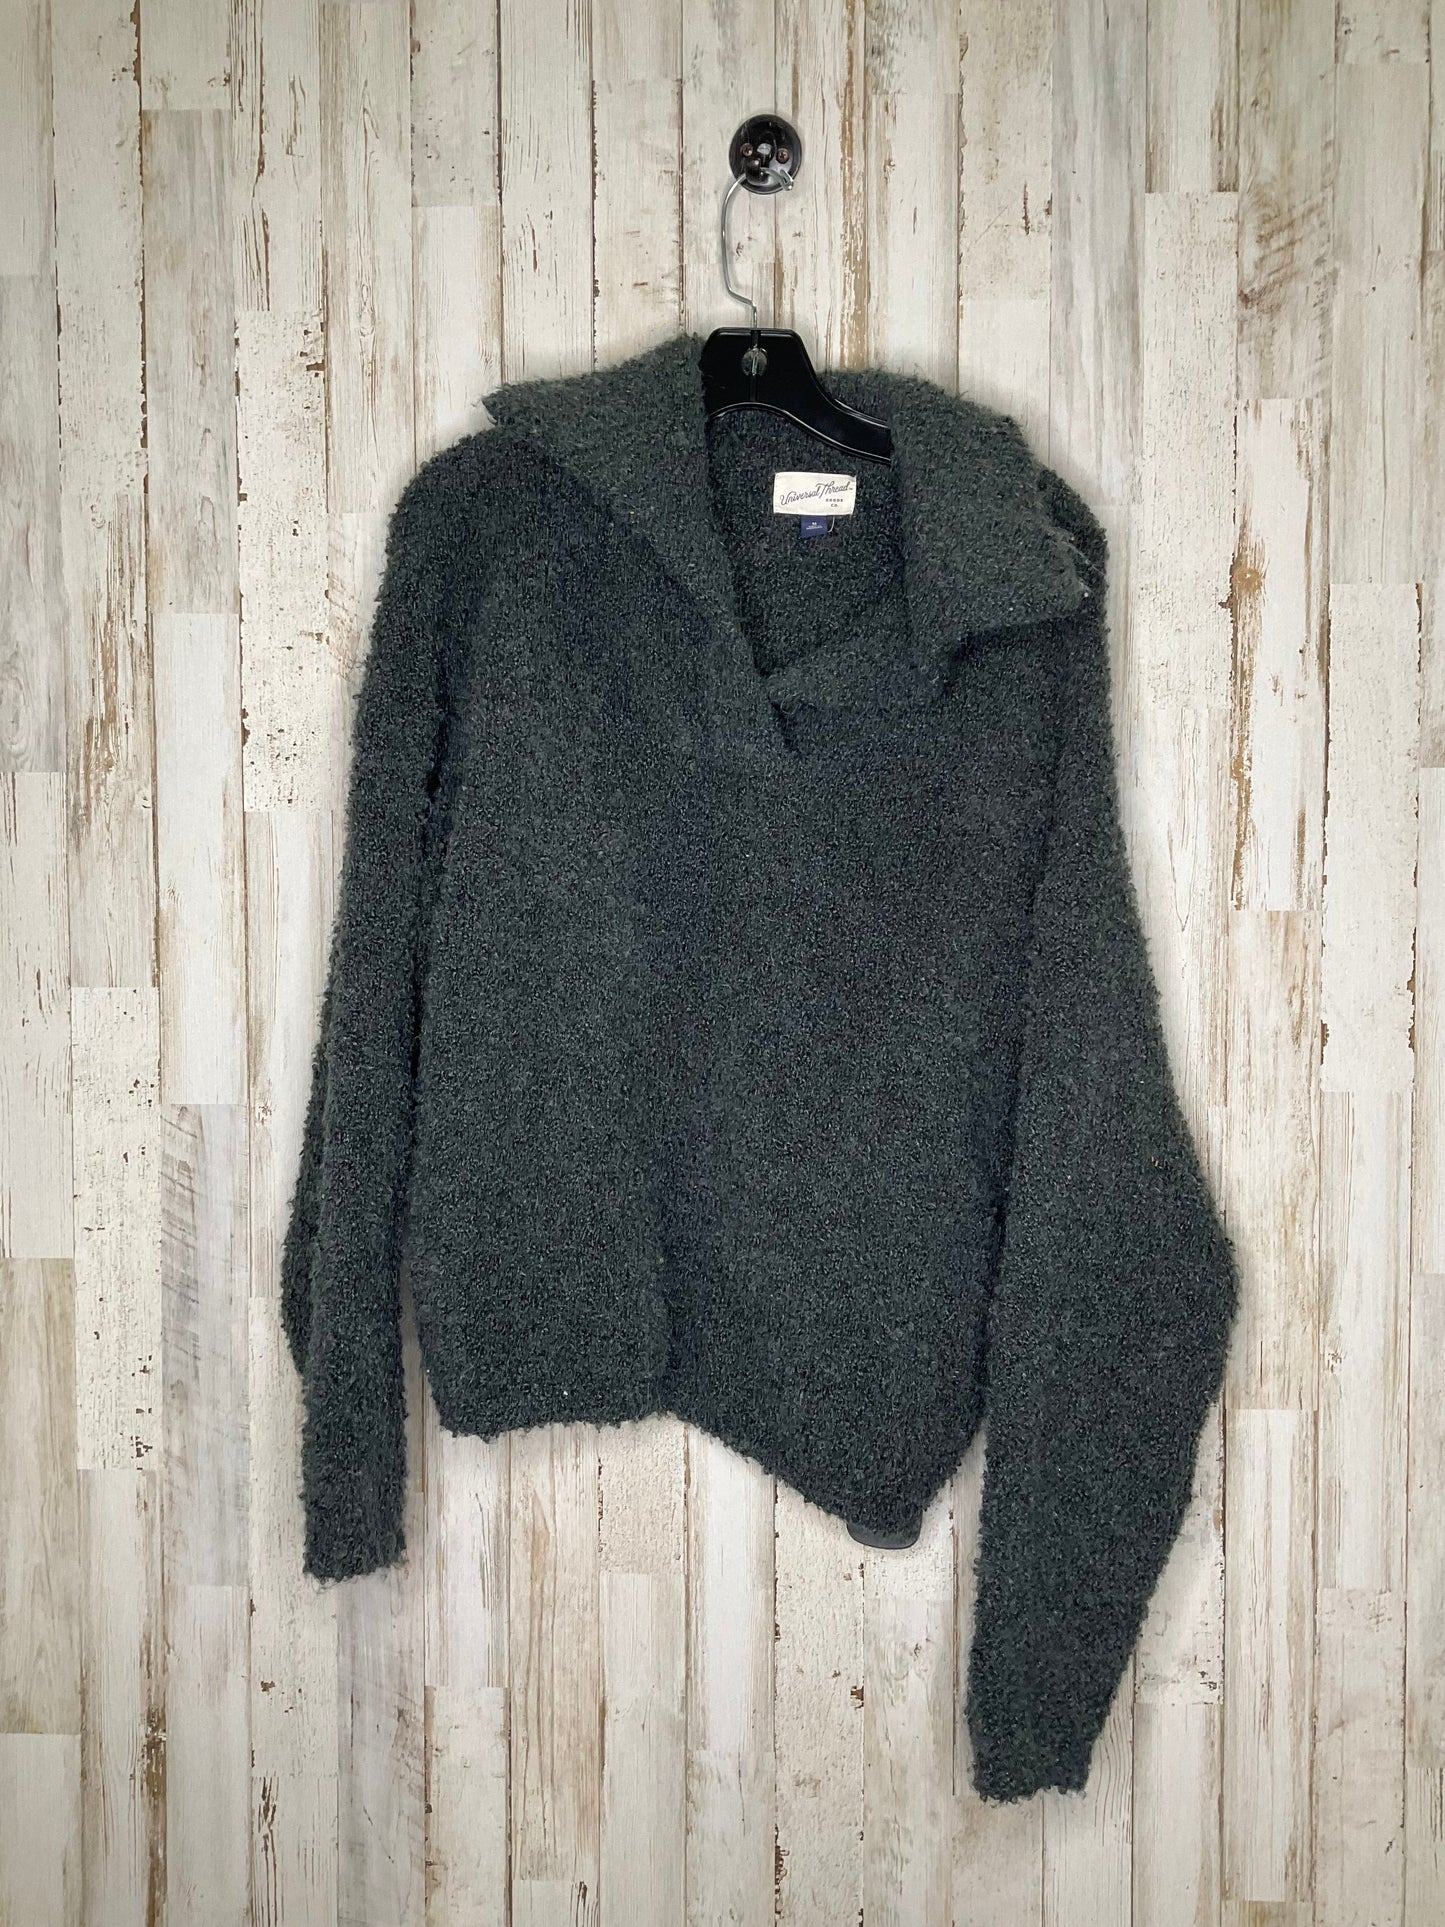 Sweater By Universal Thread  Size: M